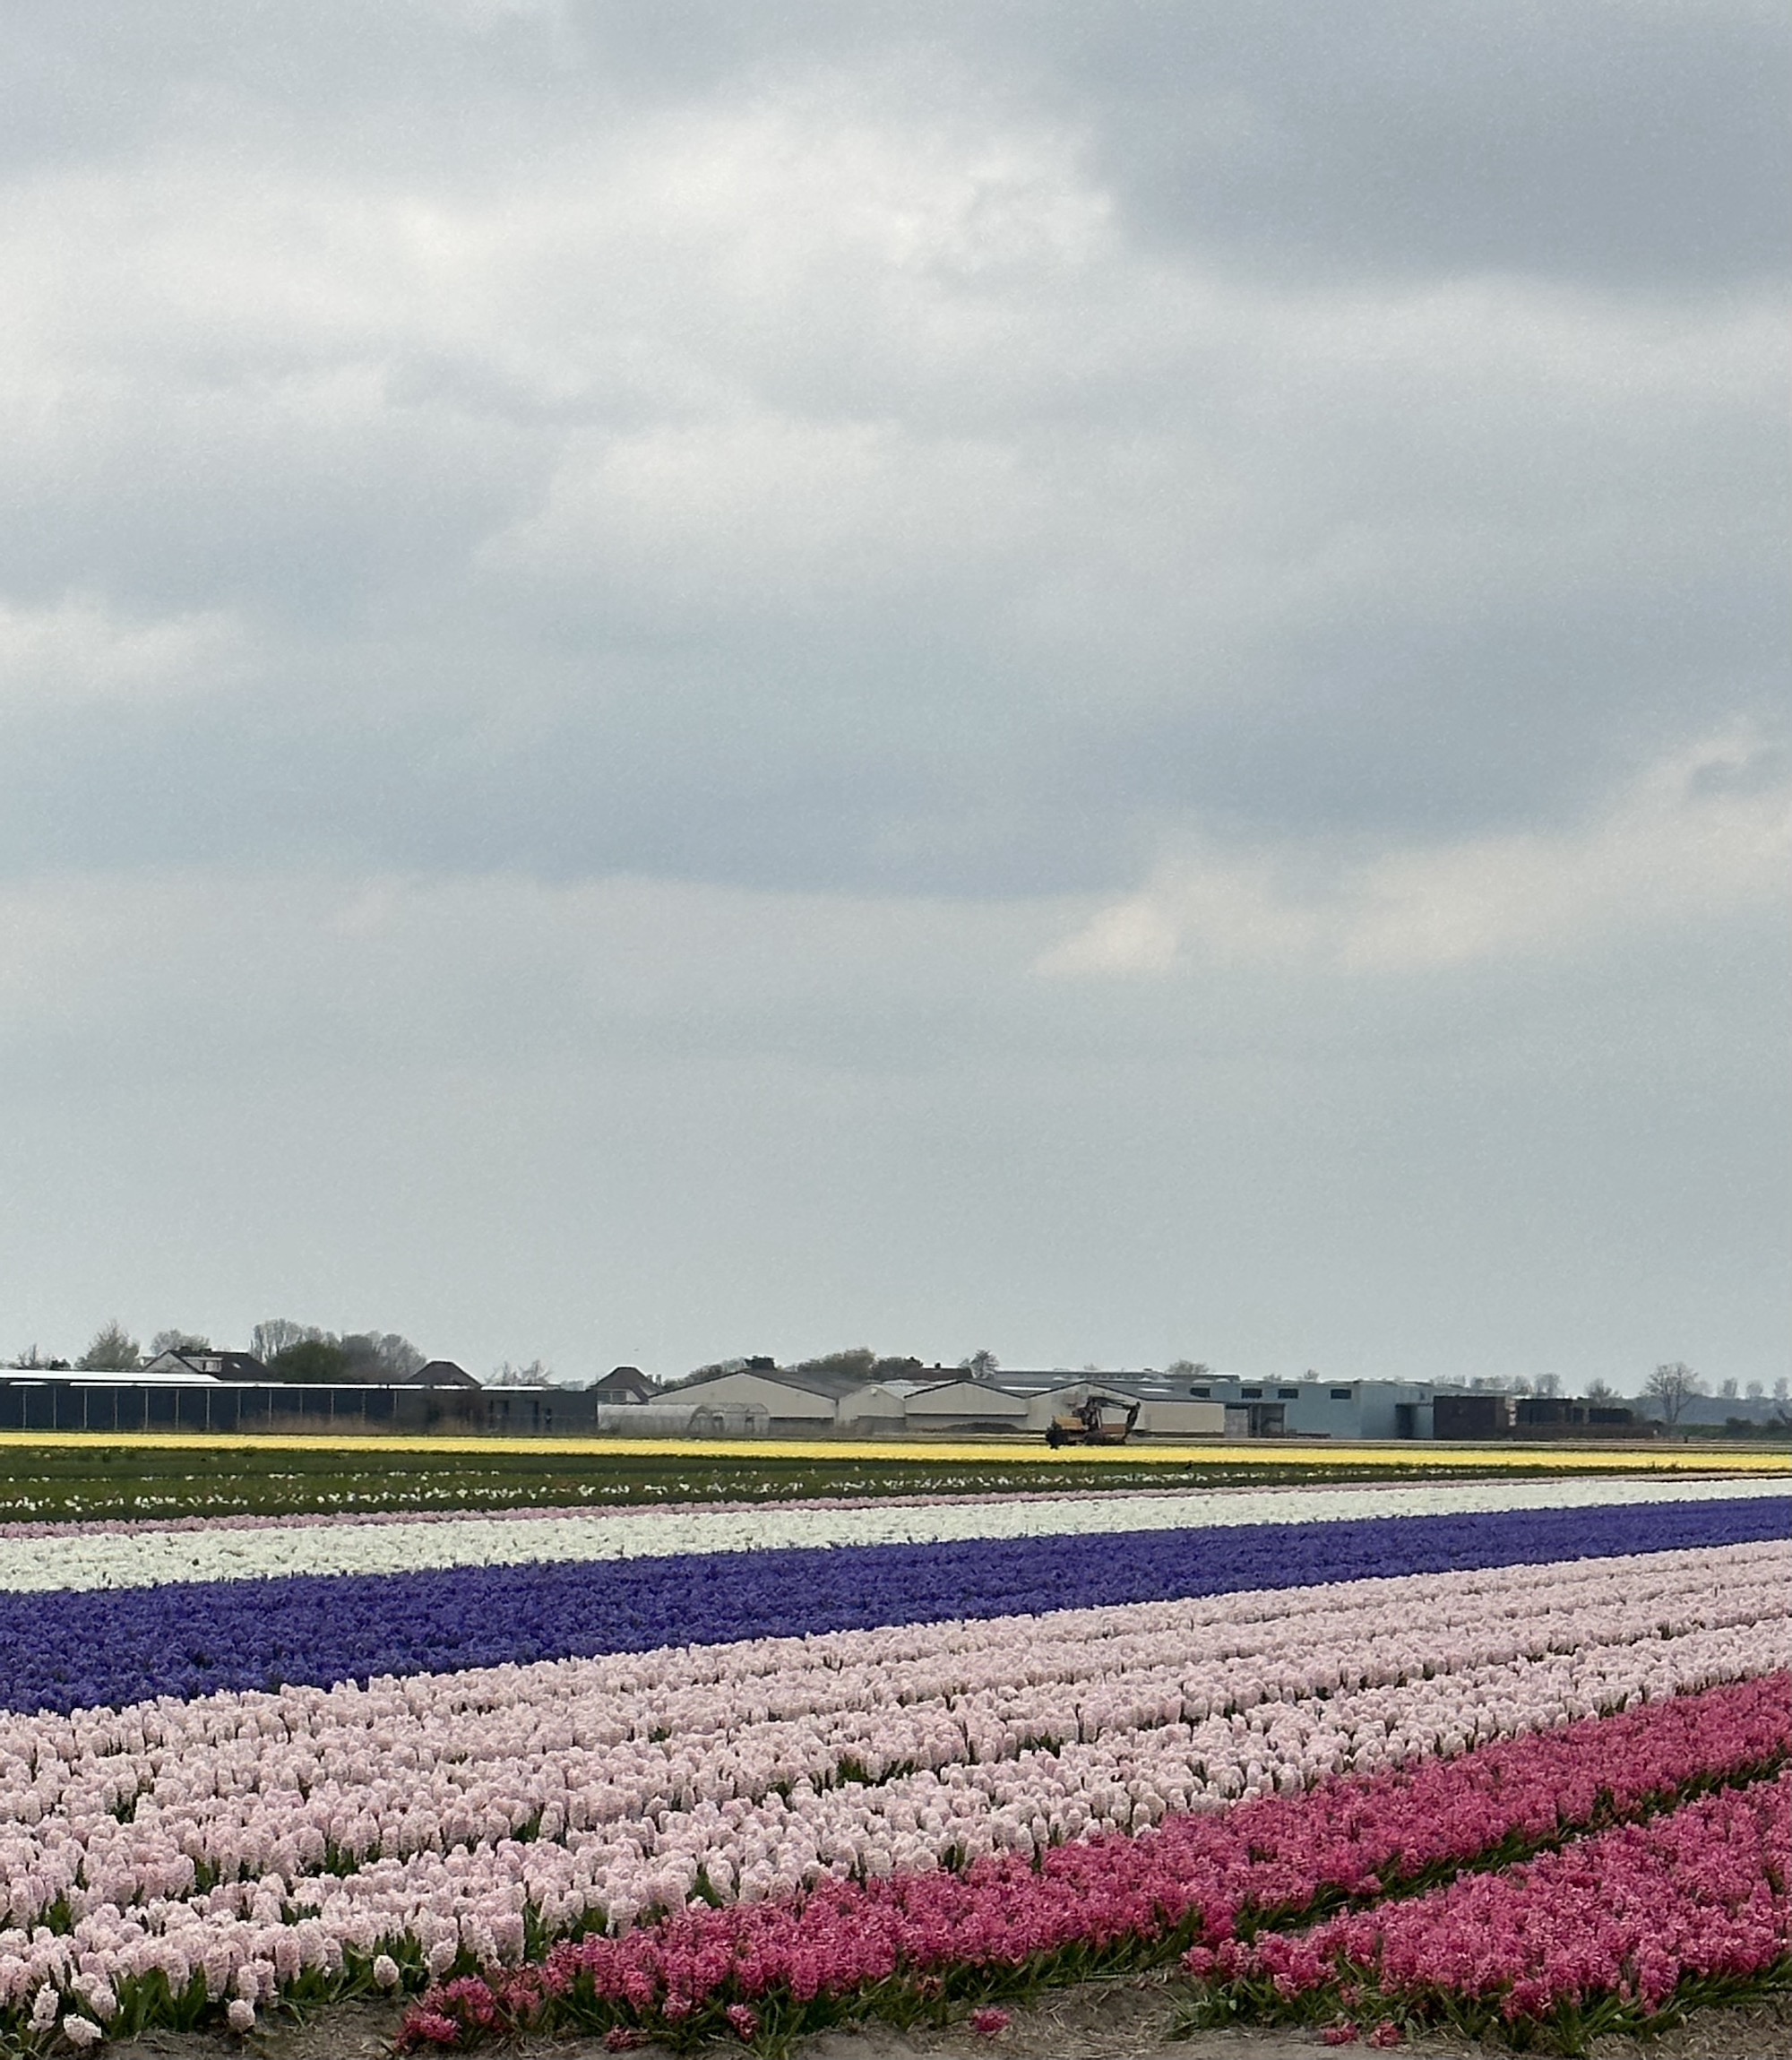 Tulip fields in the netherlands in pink shades